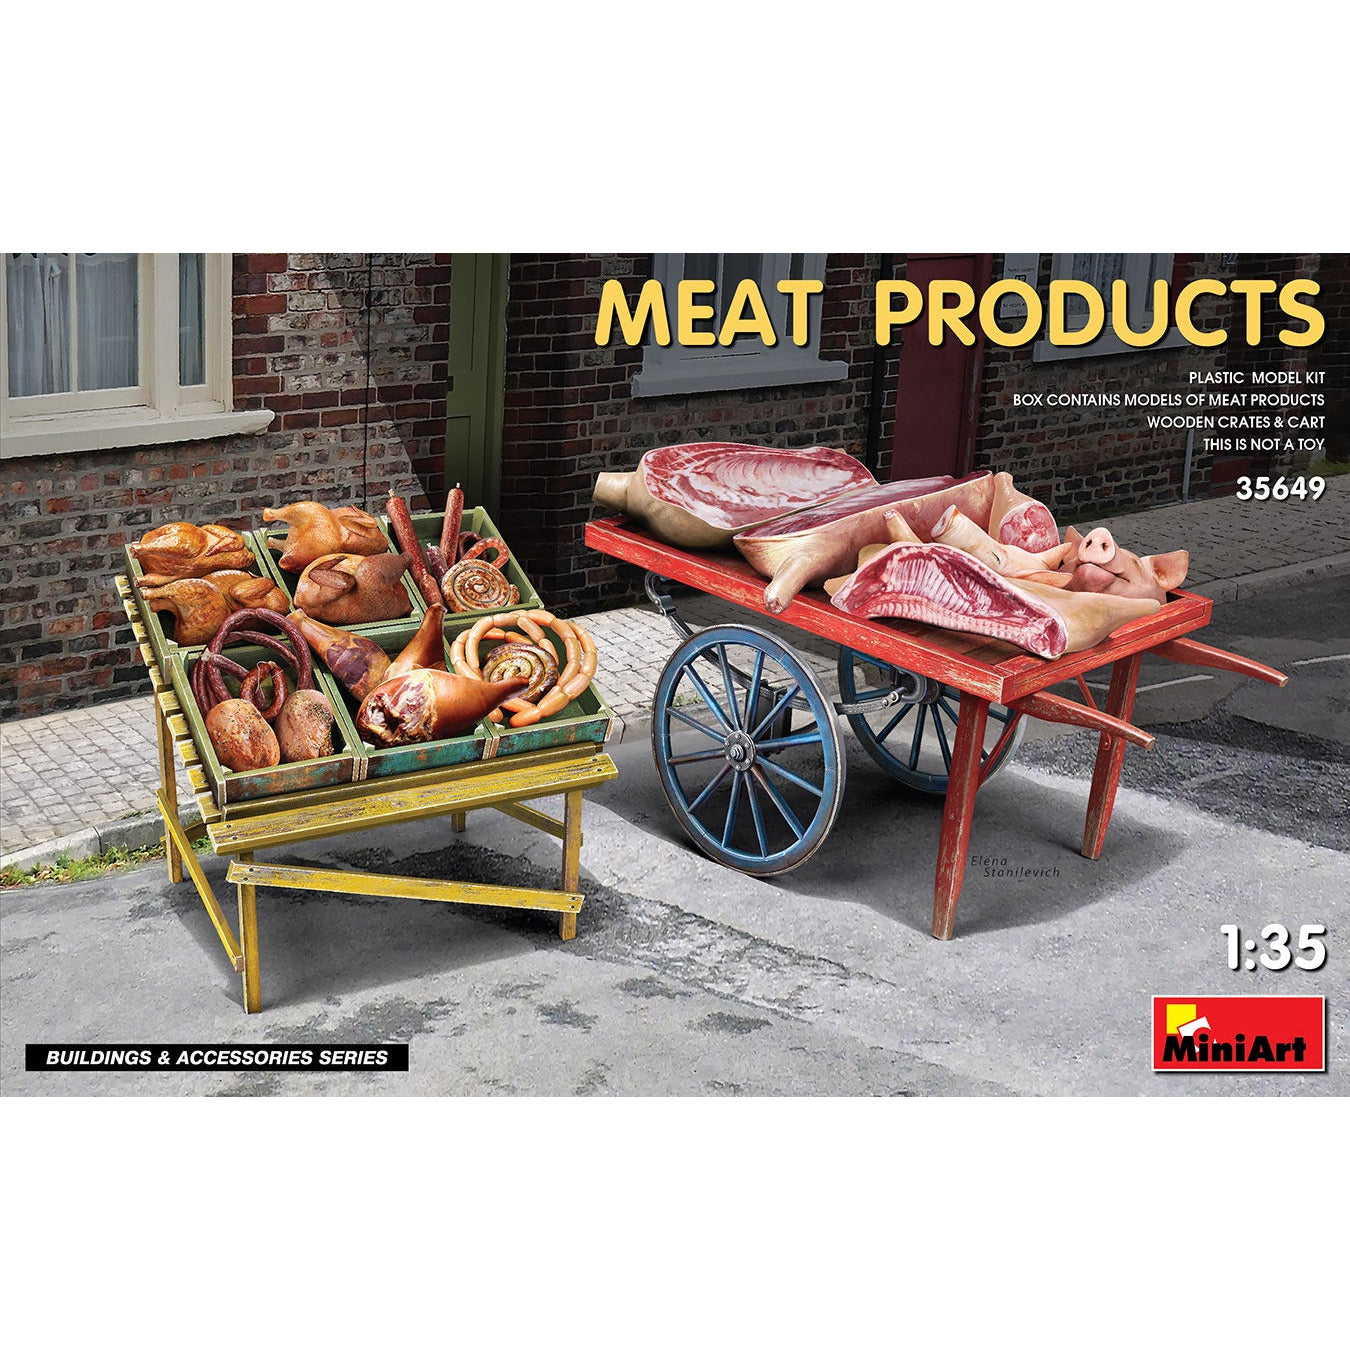 Meat Products #35649 1/35 Scenery Kit by MiniArt